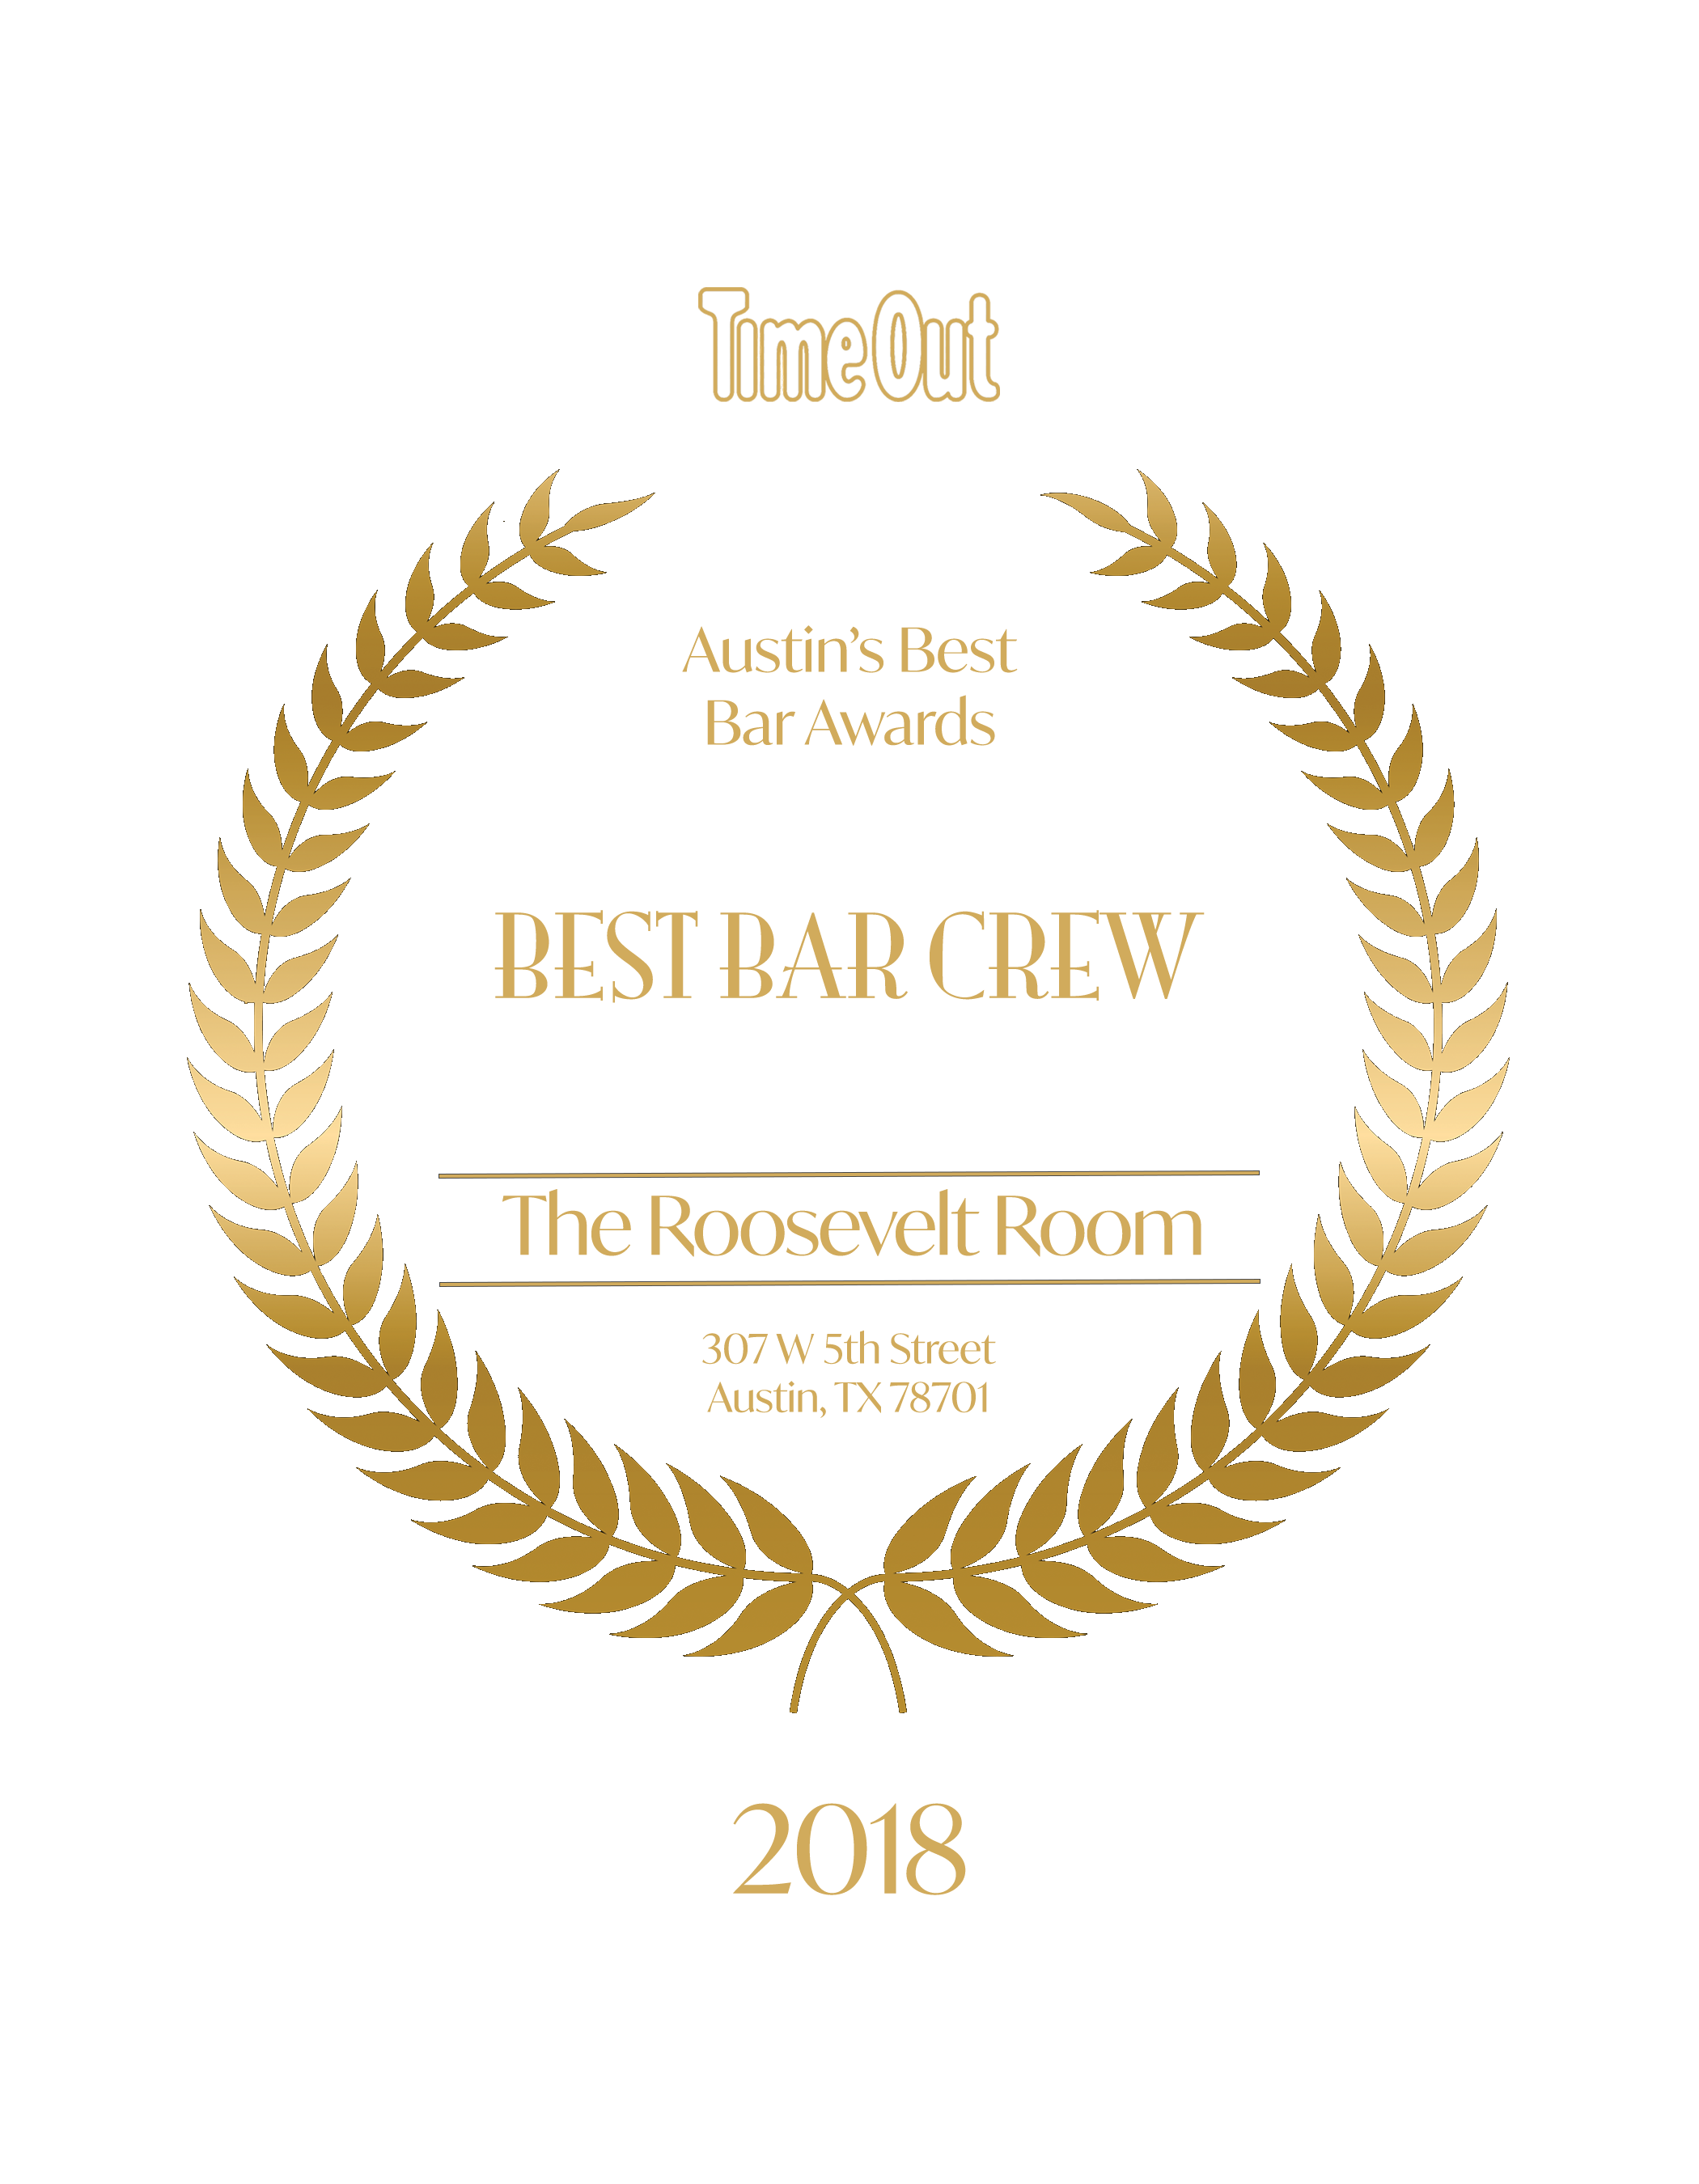 TimeOut Best Bar Crew Plaque 7x9 (No Background).png